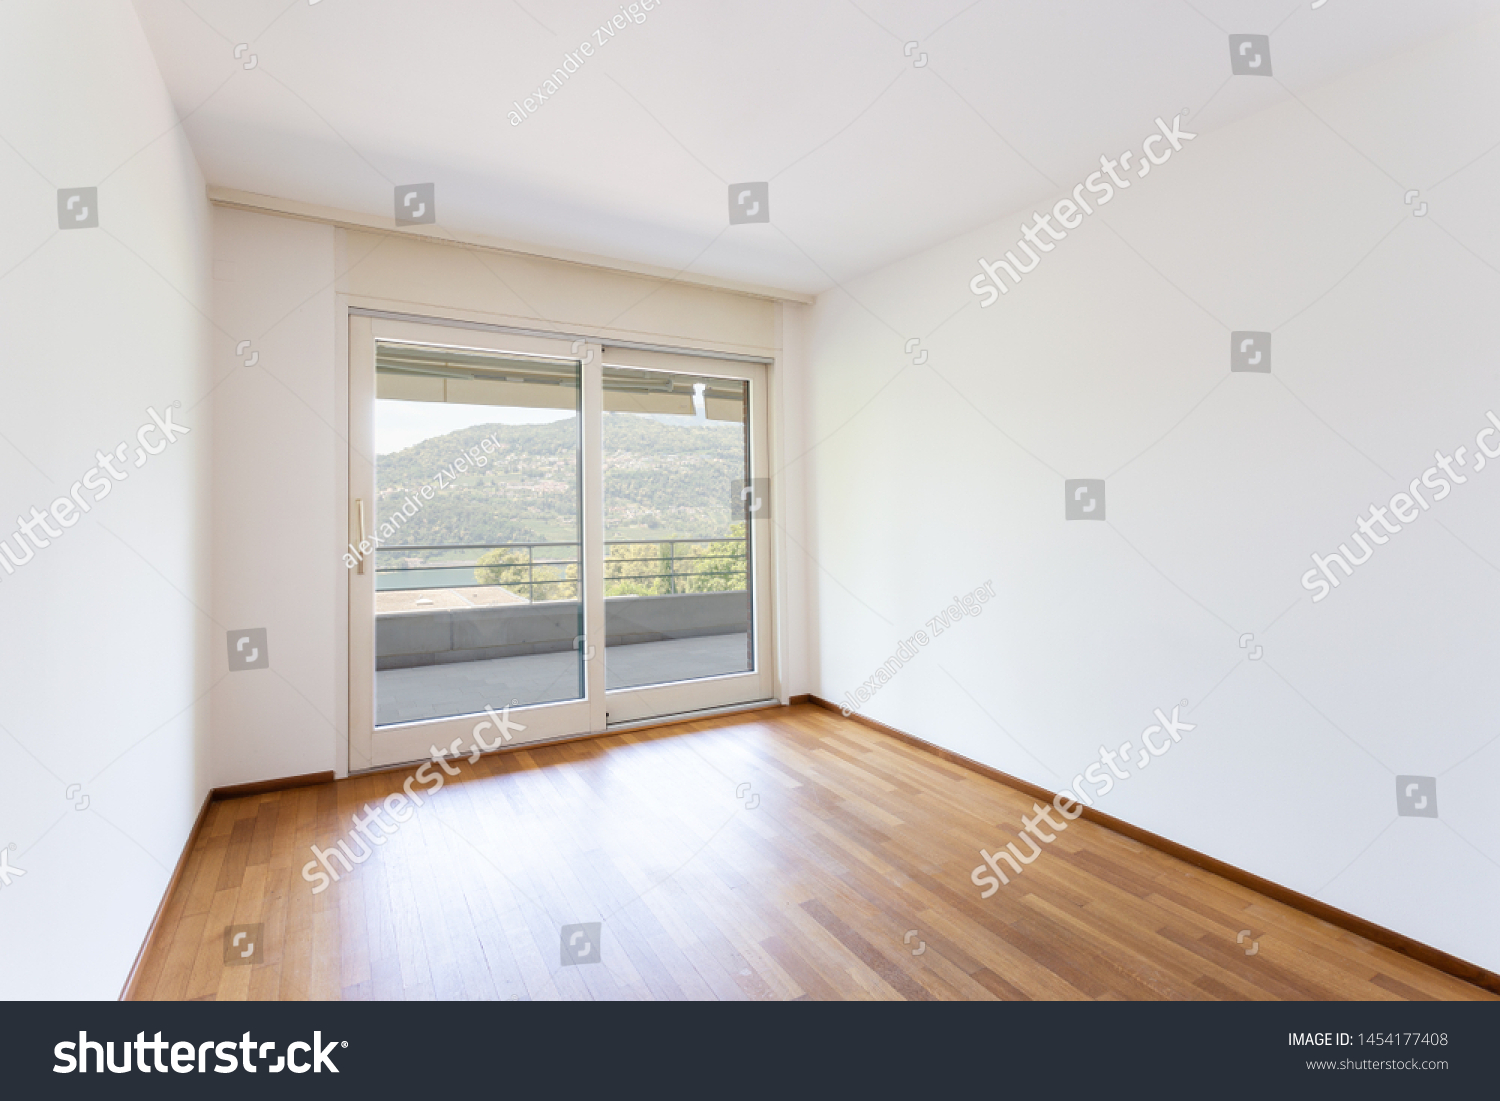 Bedroom with white walls and parquet. Window with lake view. Nobody inside #1454177408